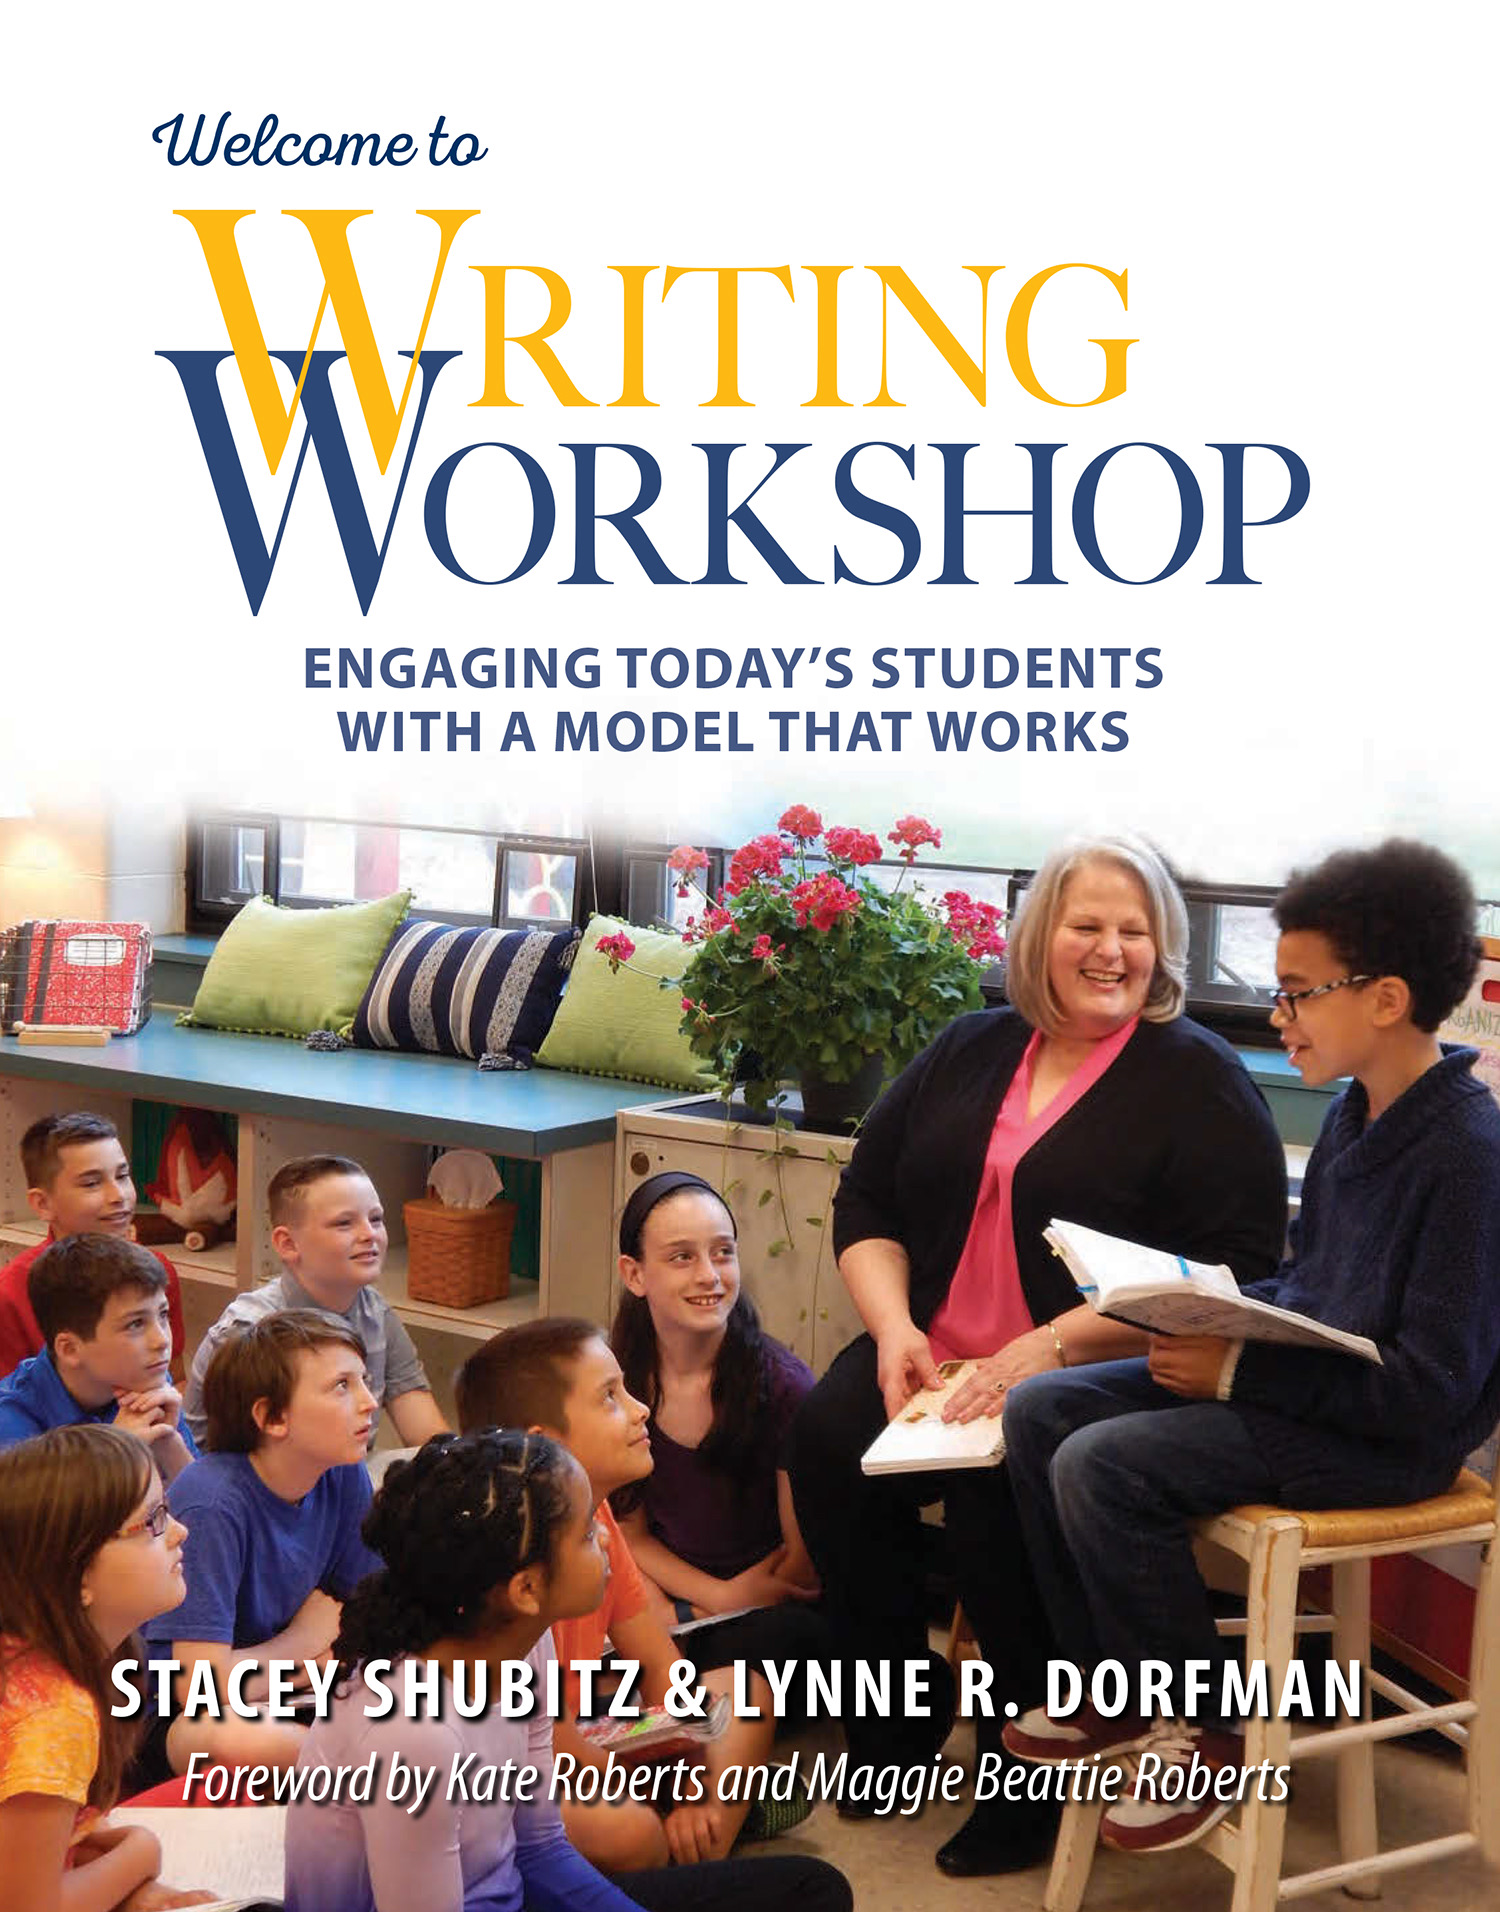 Book Cover of Welcome to Writing Workshop. Students are sitting in the meeting area with the teacher while one student shares their writing.